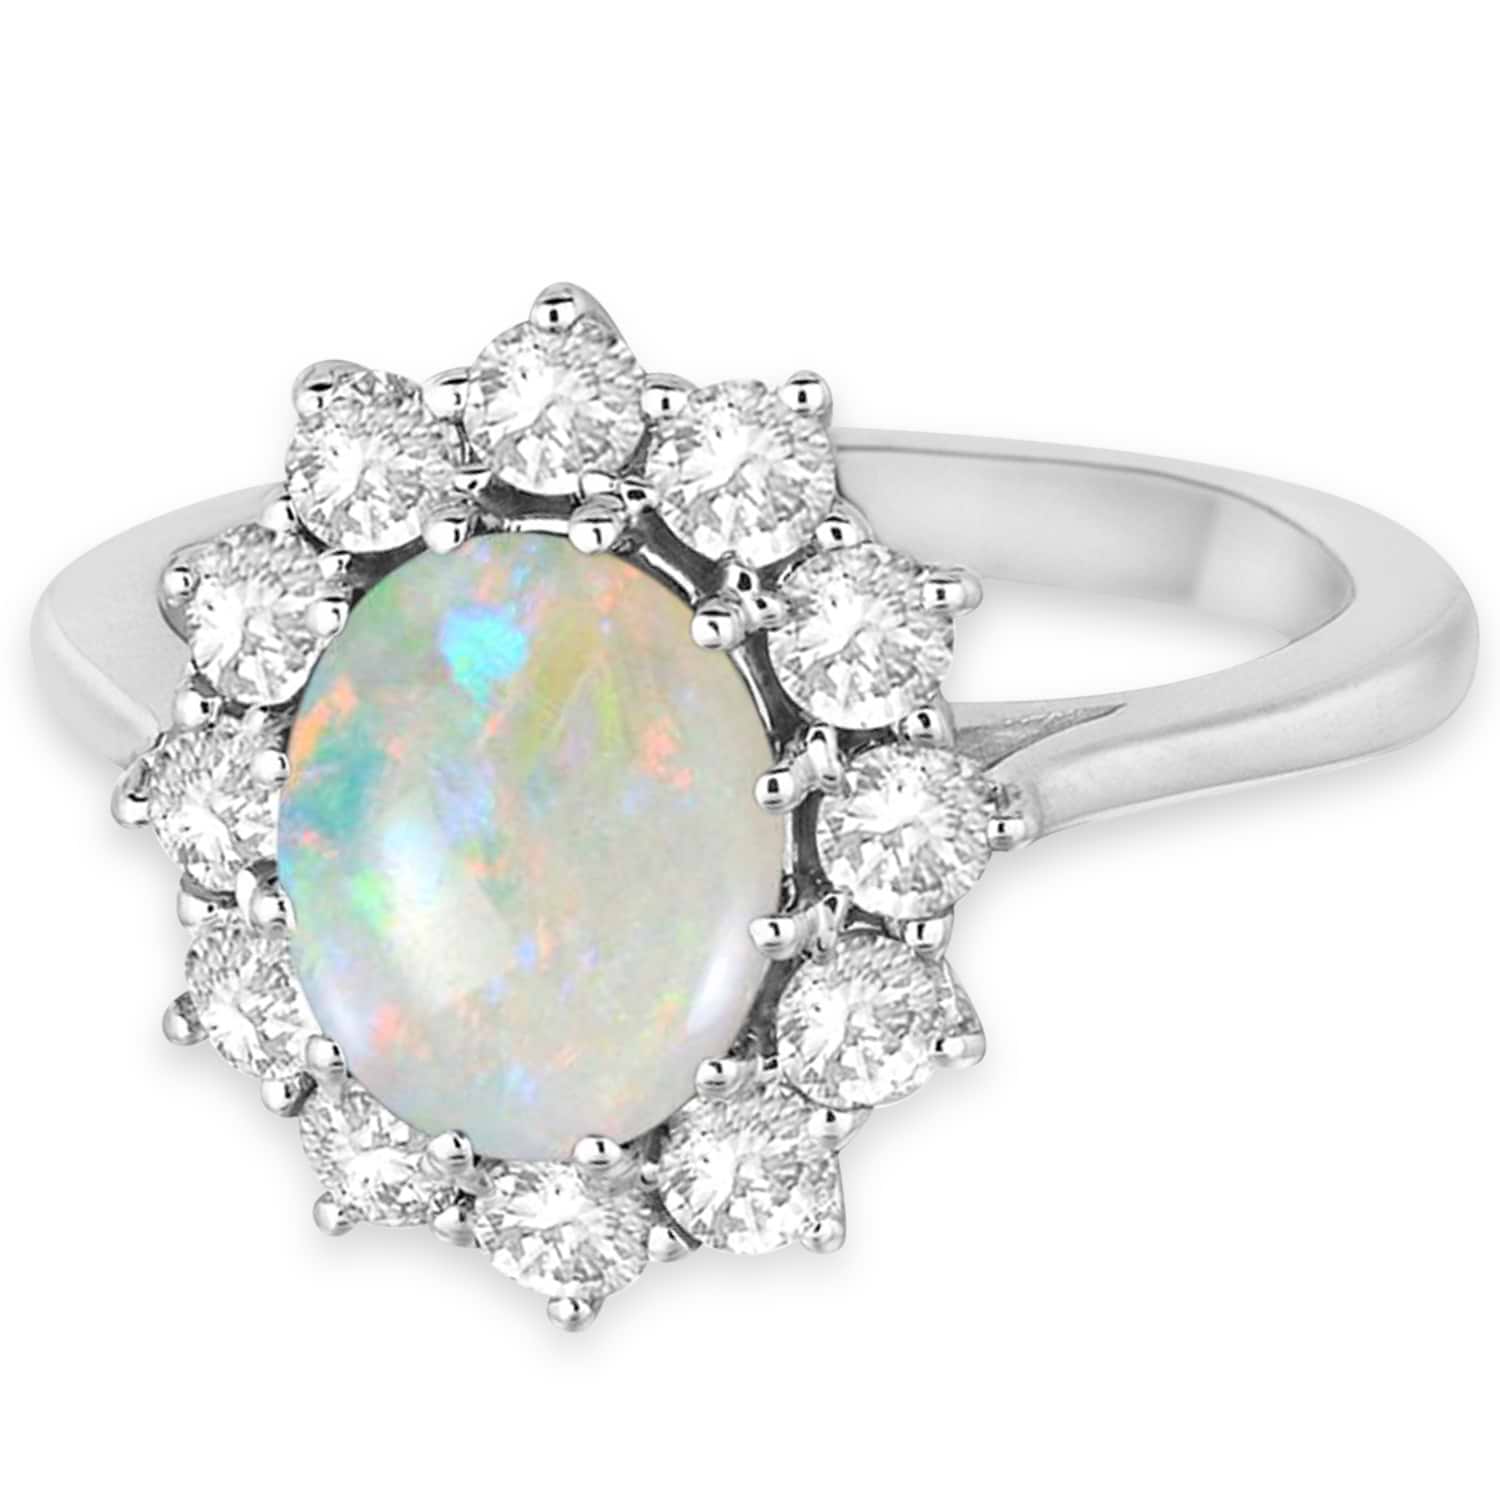 Oval Shape Opal & Diamond Accented Ring 14k White Gold 3.60ct - IR1690